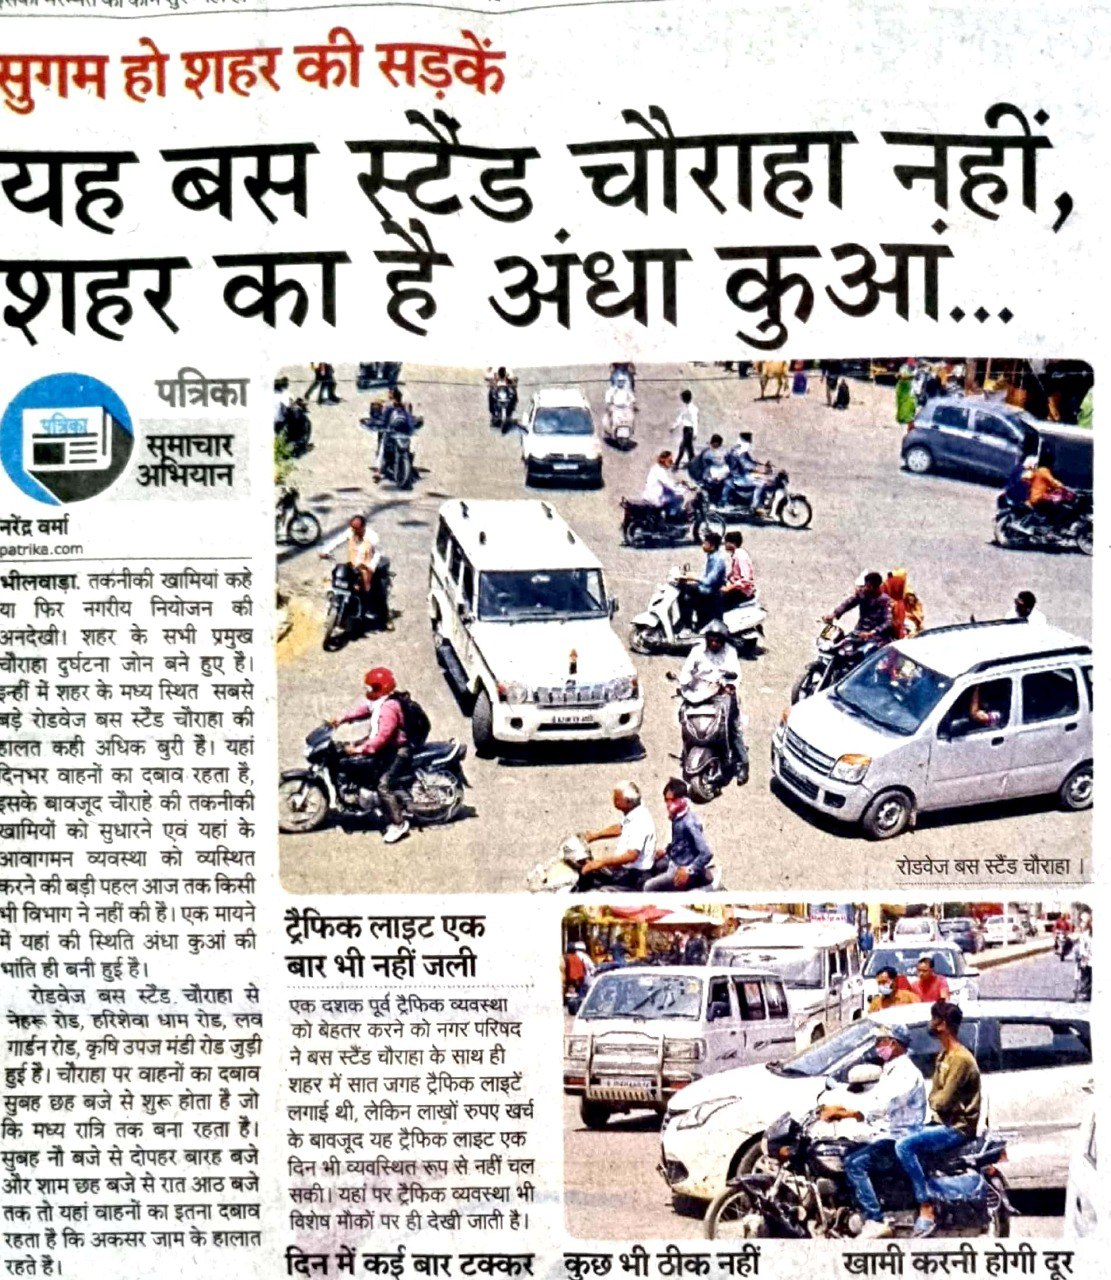 Be careful, this is the bus stand intersection of Bhilwara